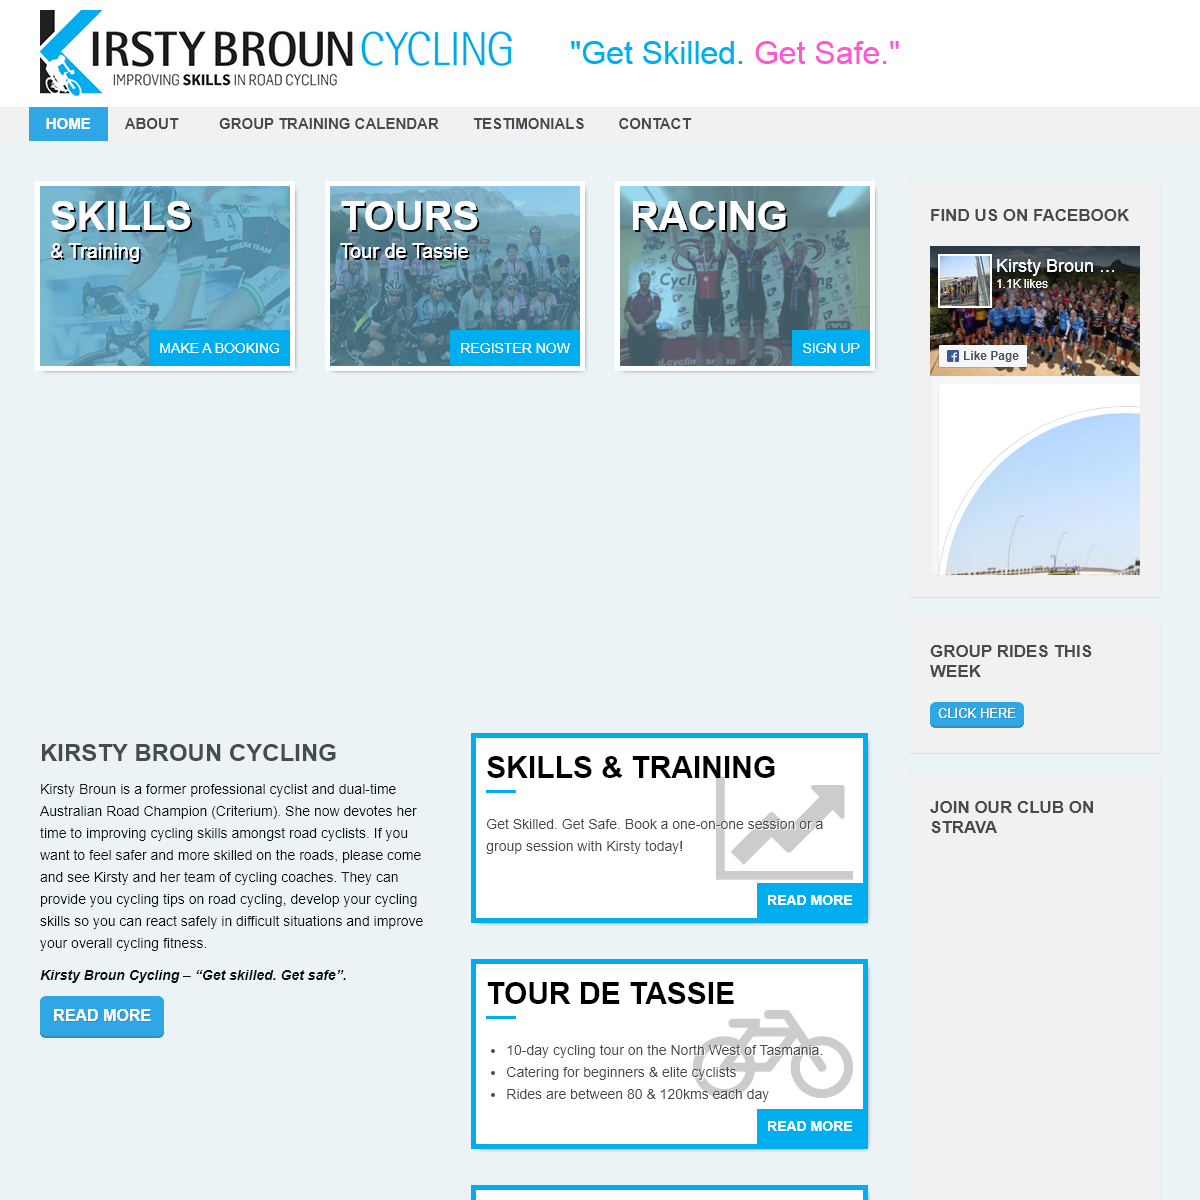 A complete backup of kirstybroun.com